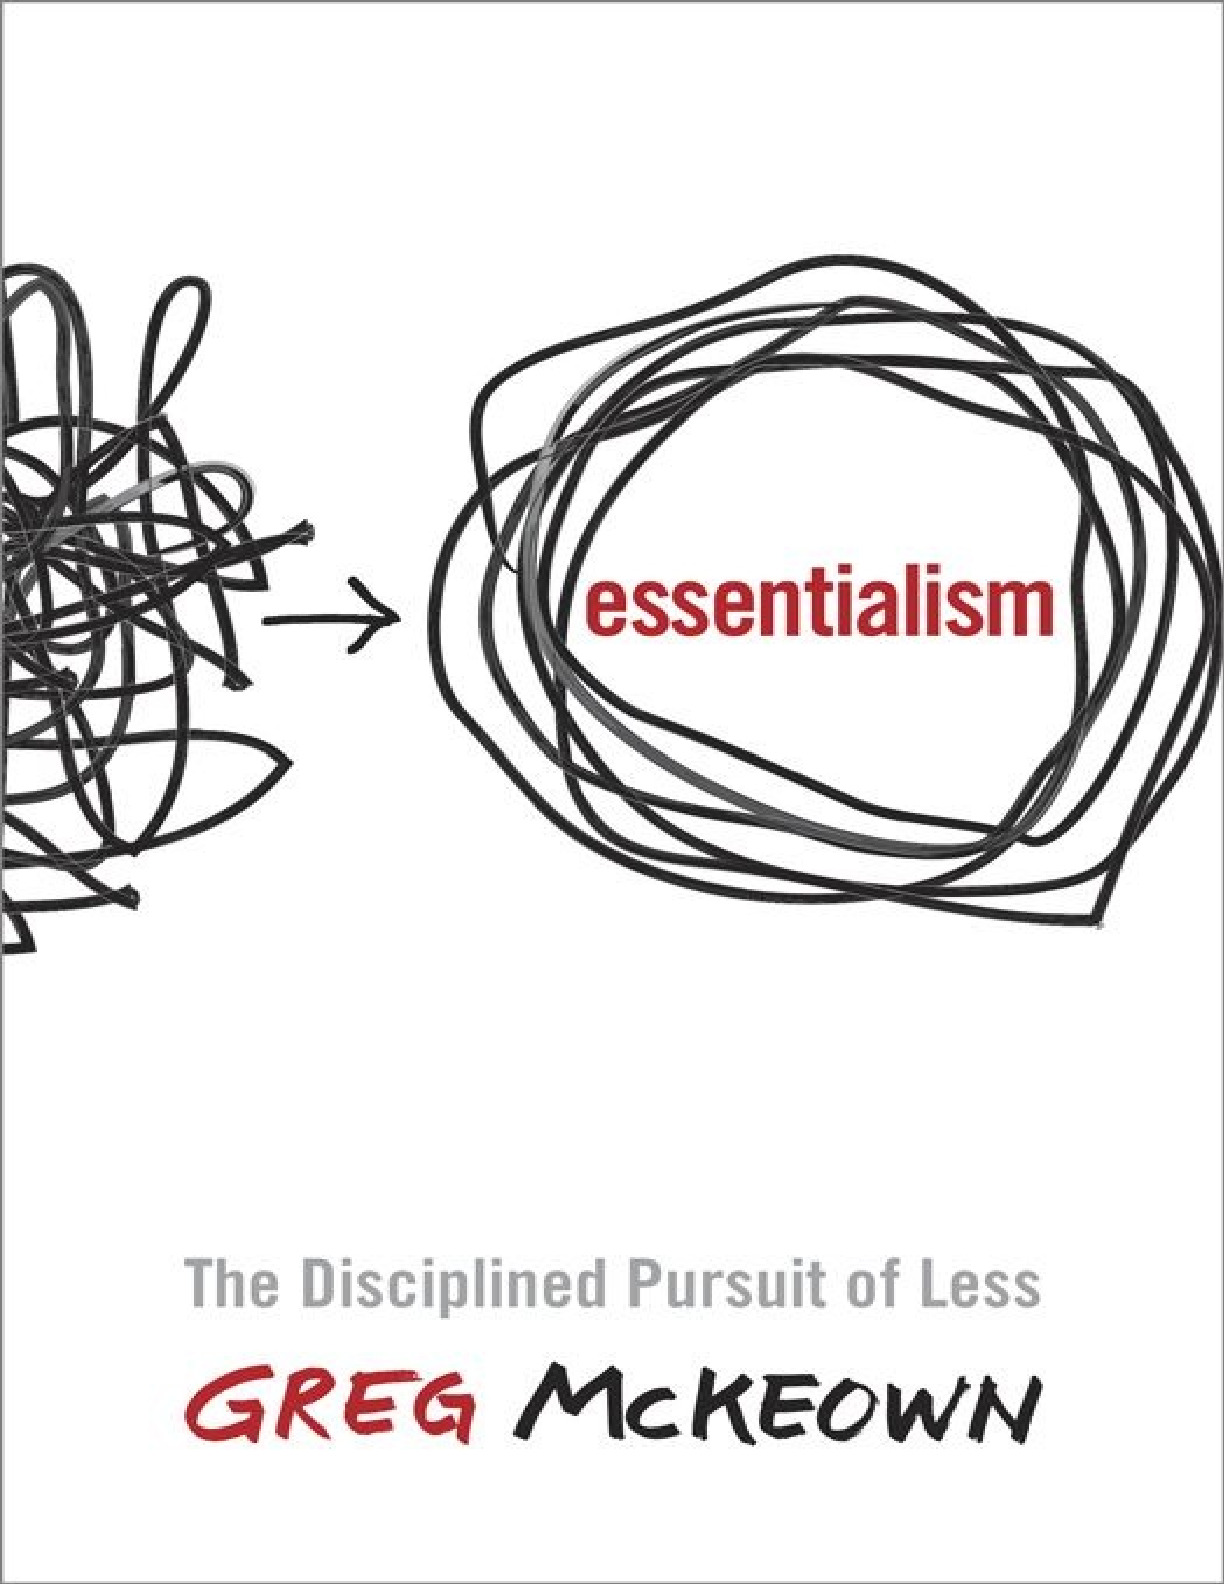 The Disciplined Pursuit of Less